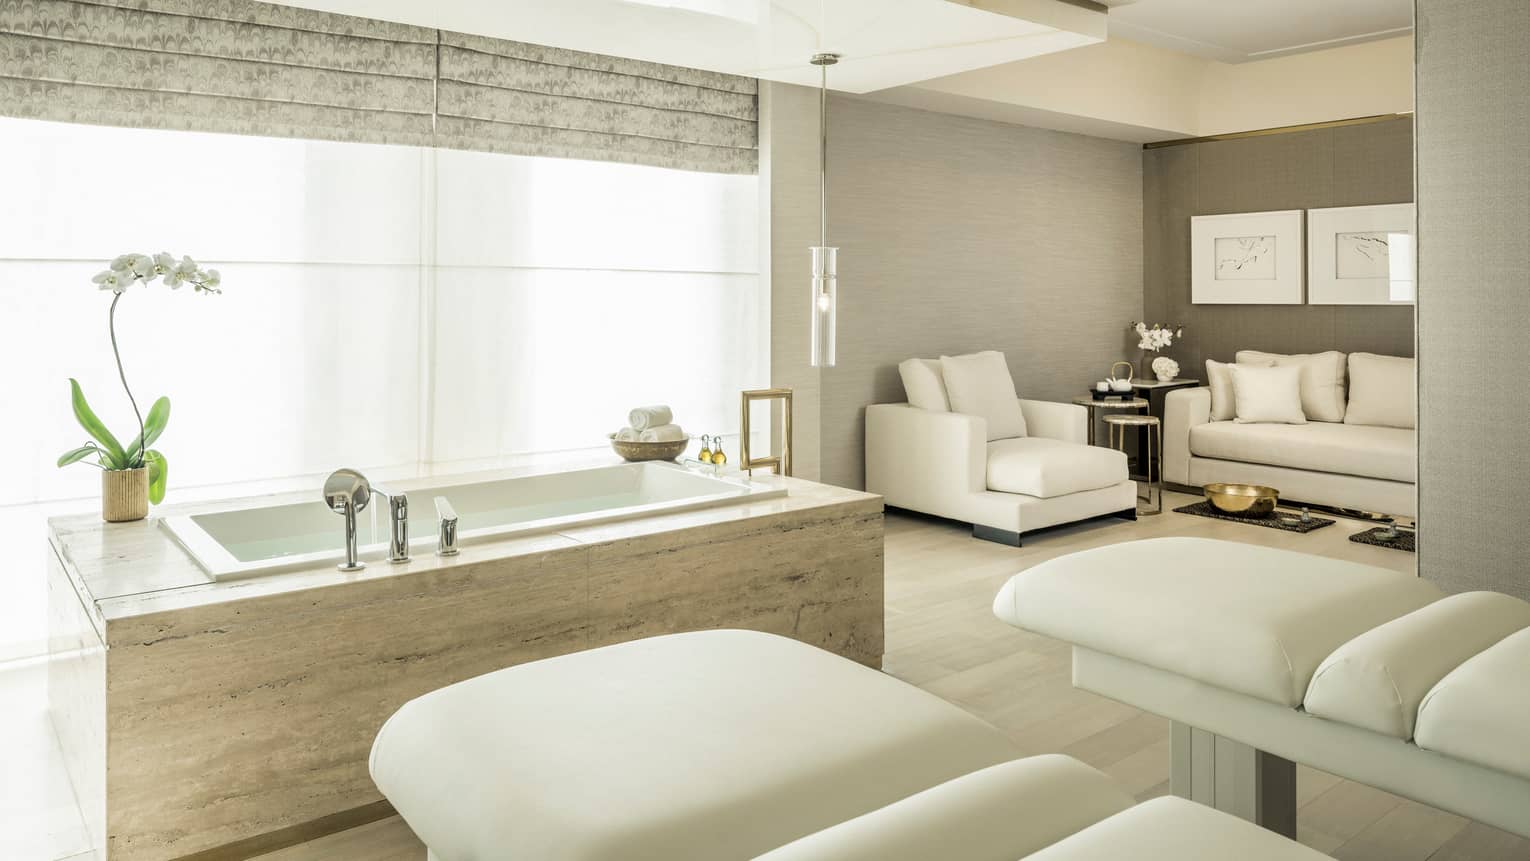 The spa suite with two massage beds, a soaking tub, and a seating area